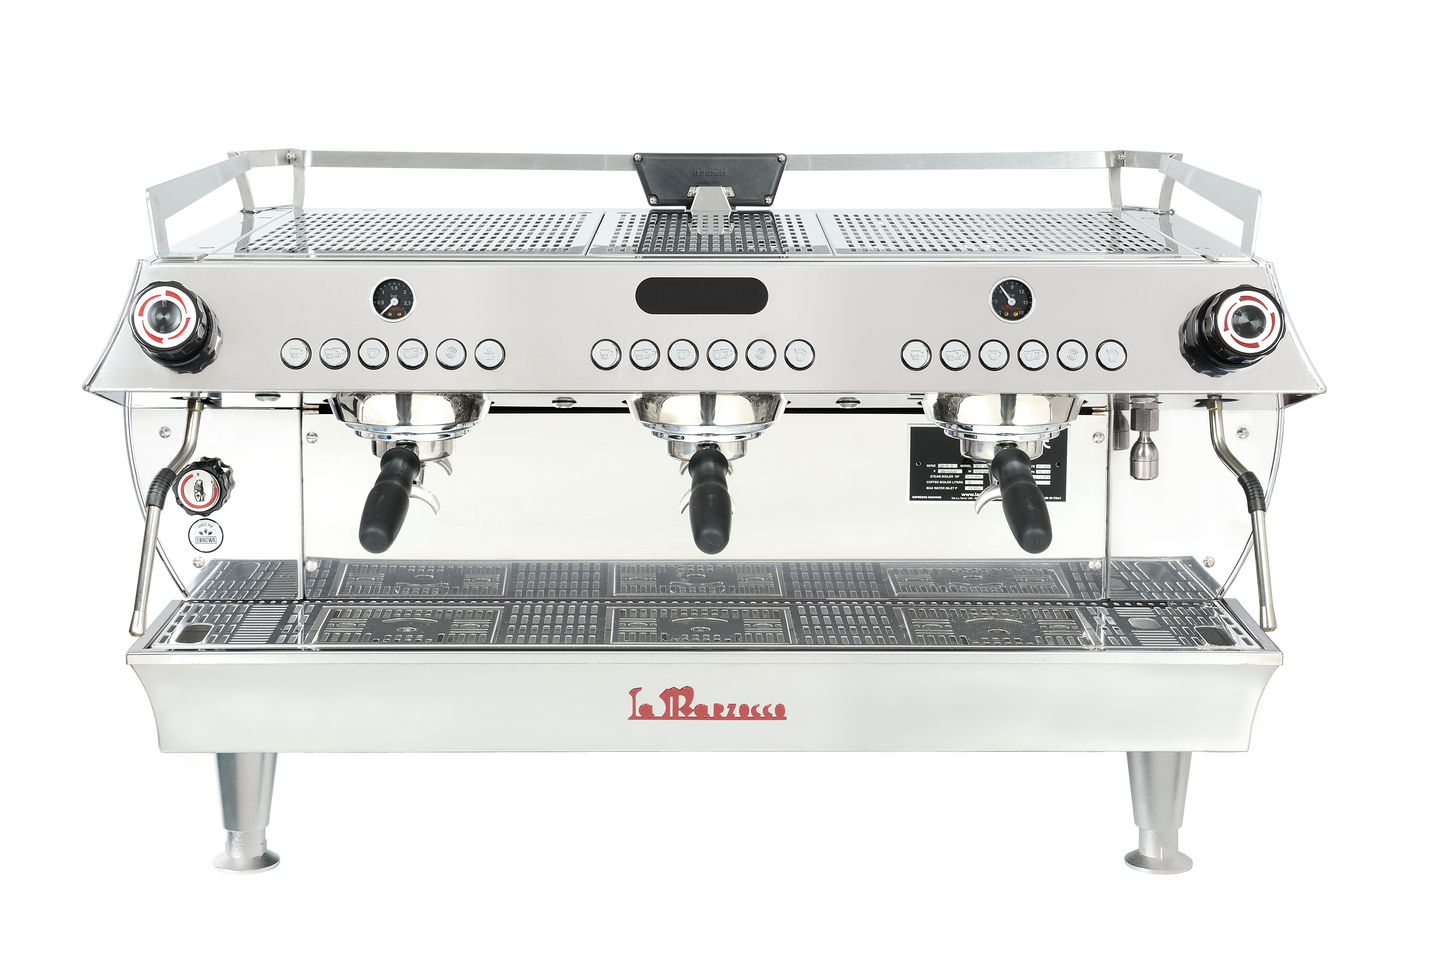 La Marzocco GB5 S 3 Group AV with Scales